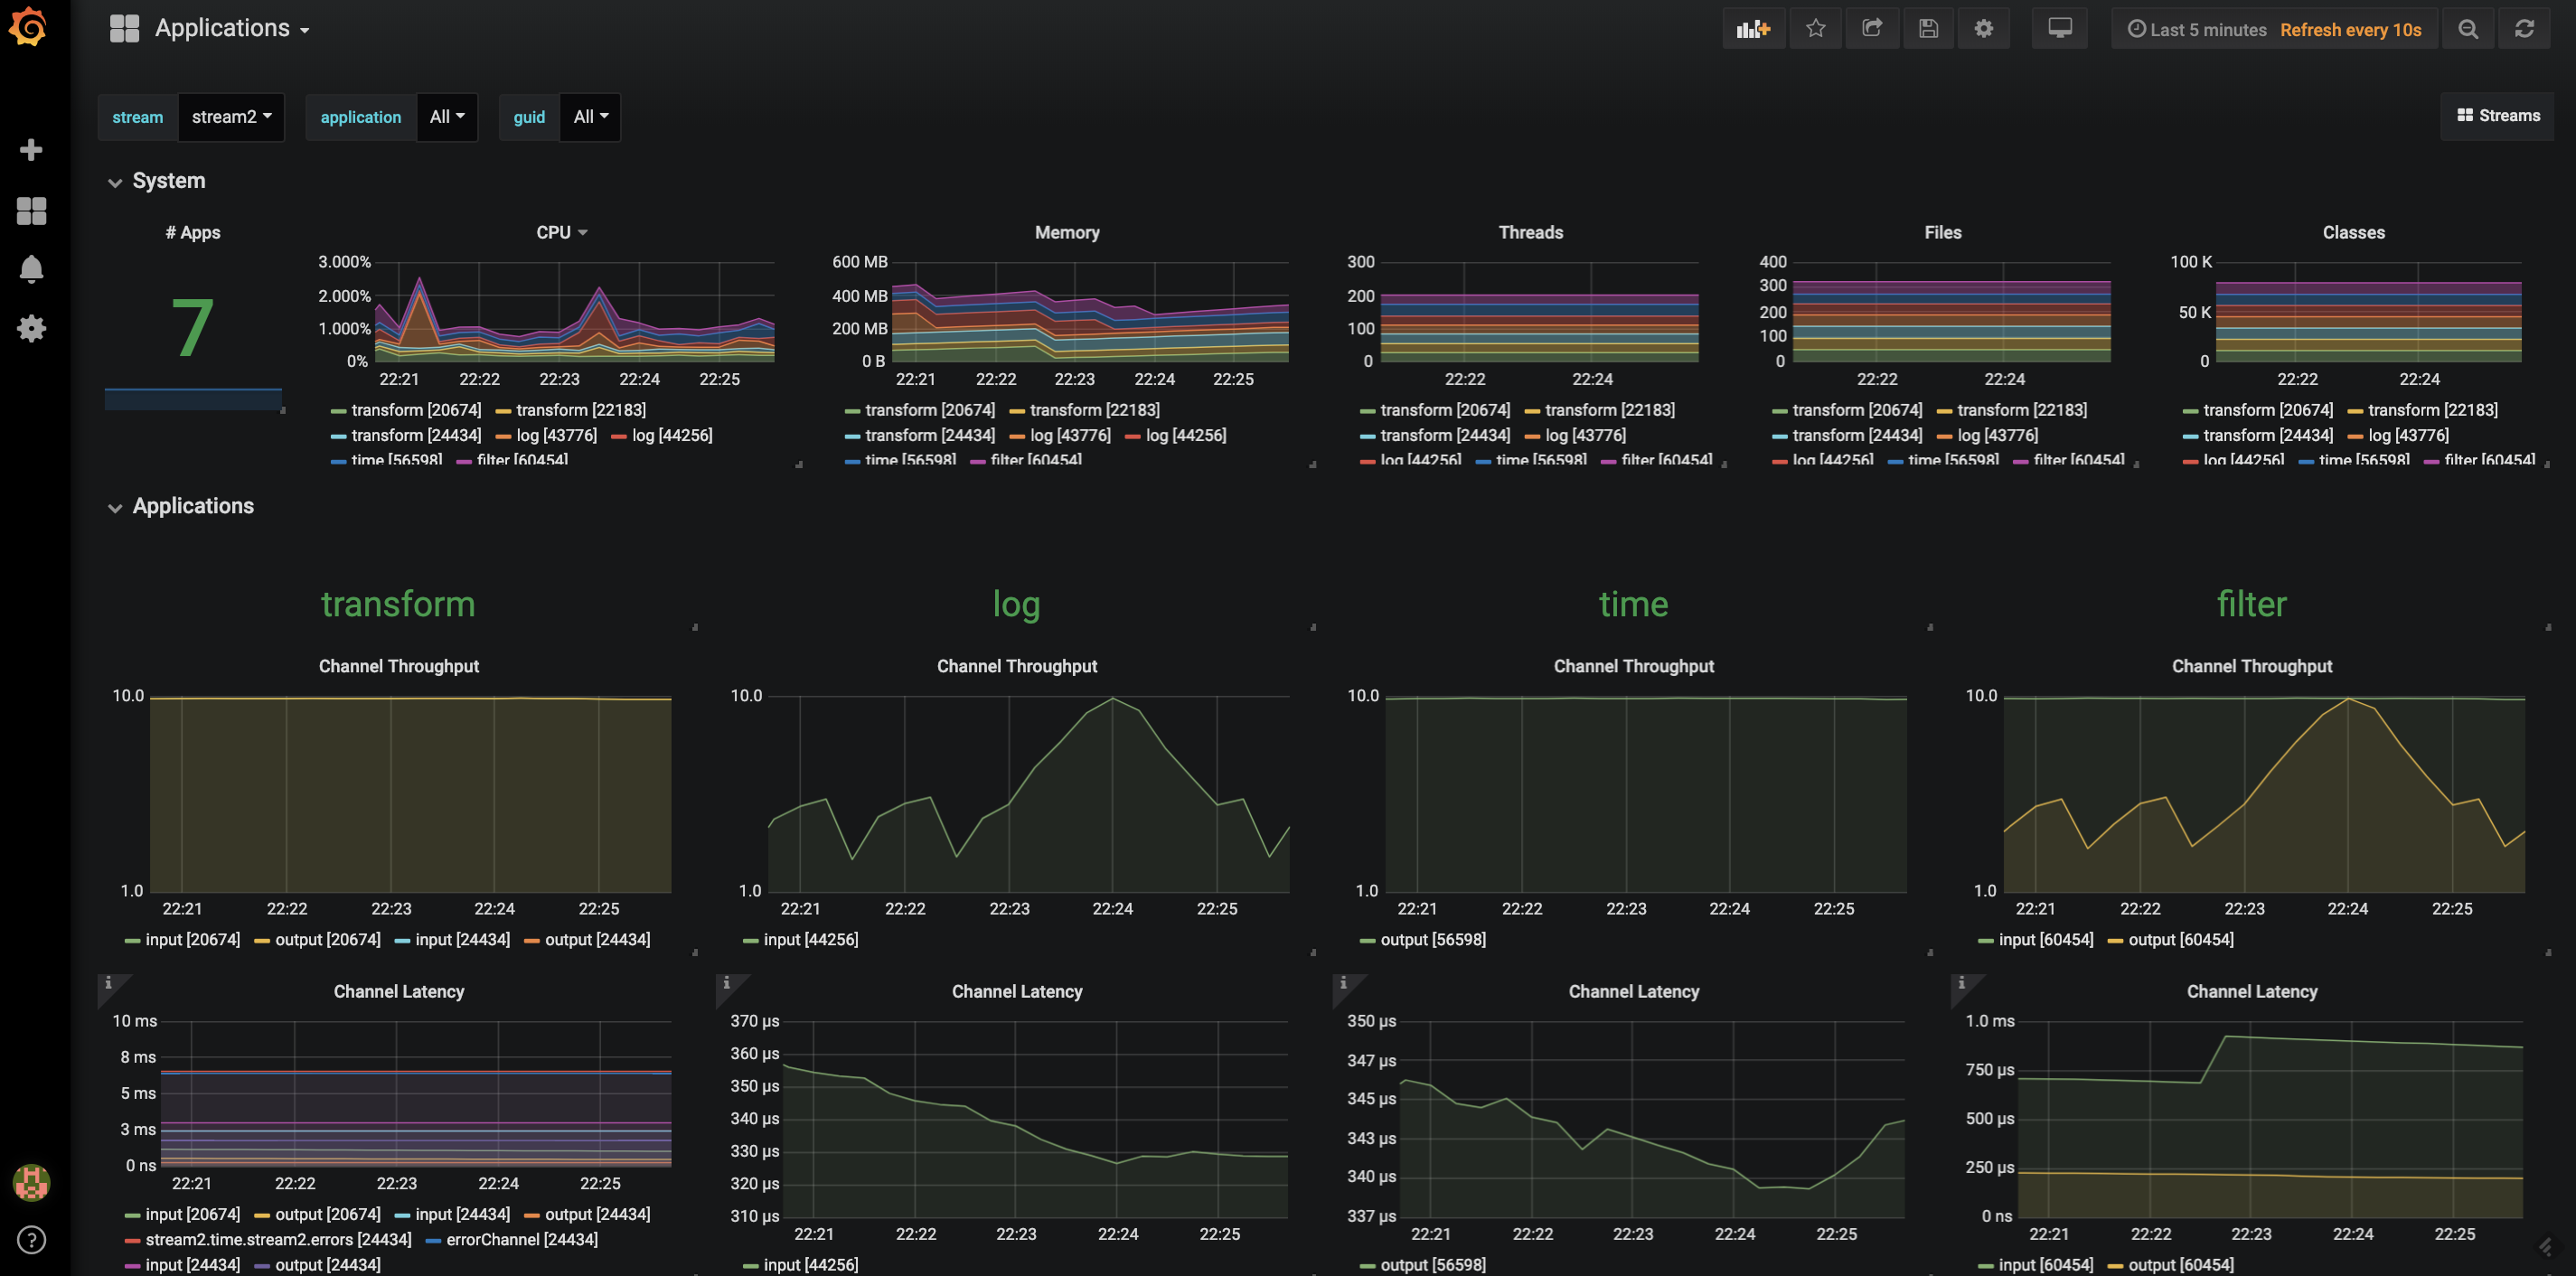 Grafana Dashboard for applications in a stream